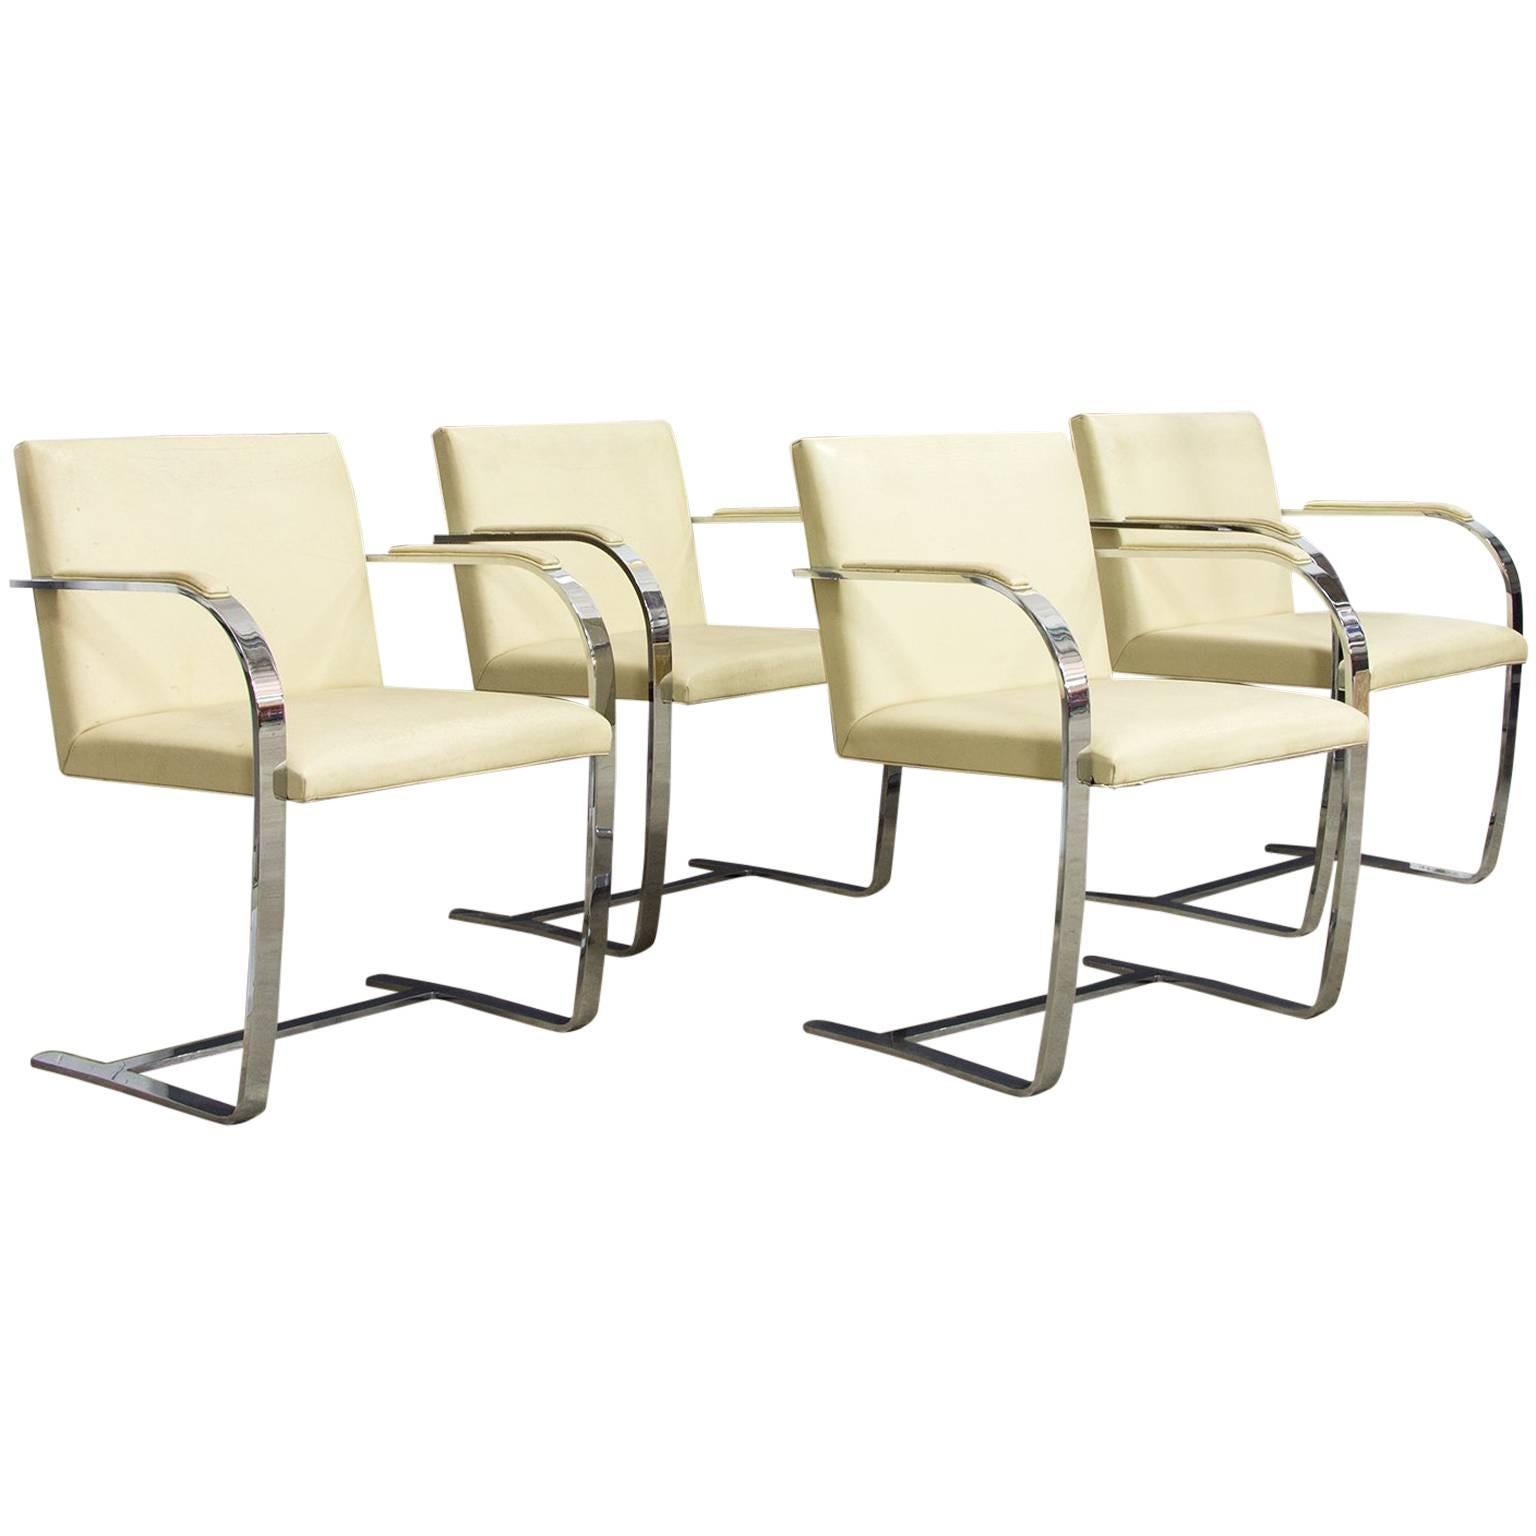 1928, Ludwig Mies van der Rohe, Early Knoll Set Brno Chairs in Crème Leather